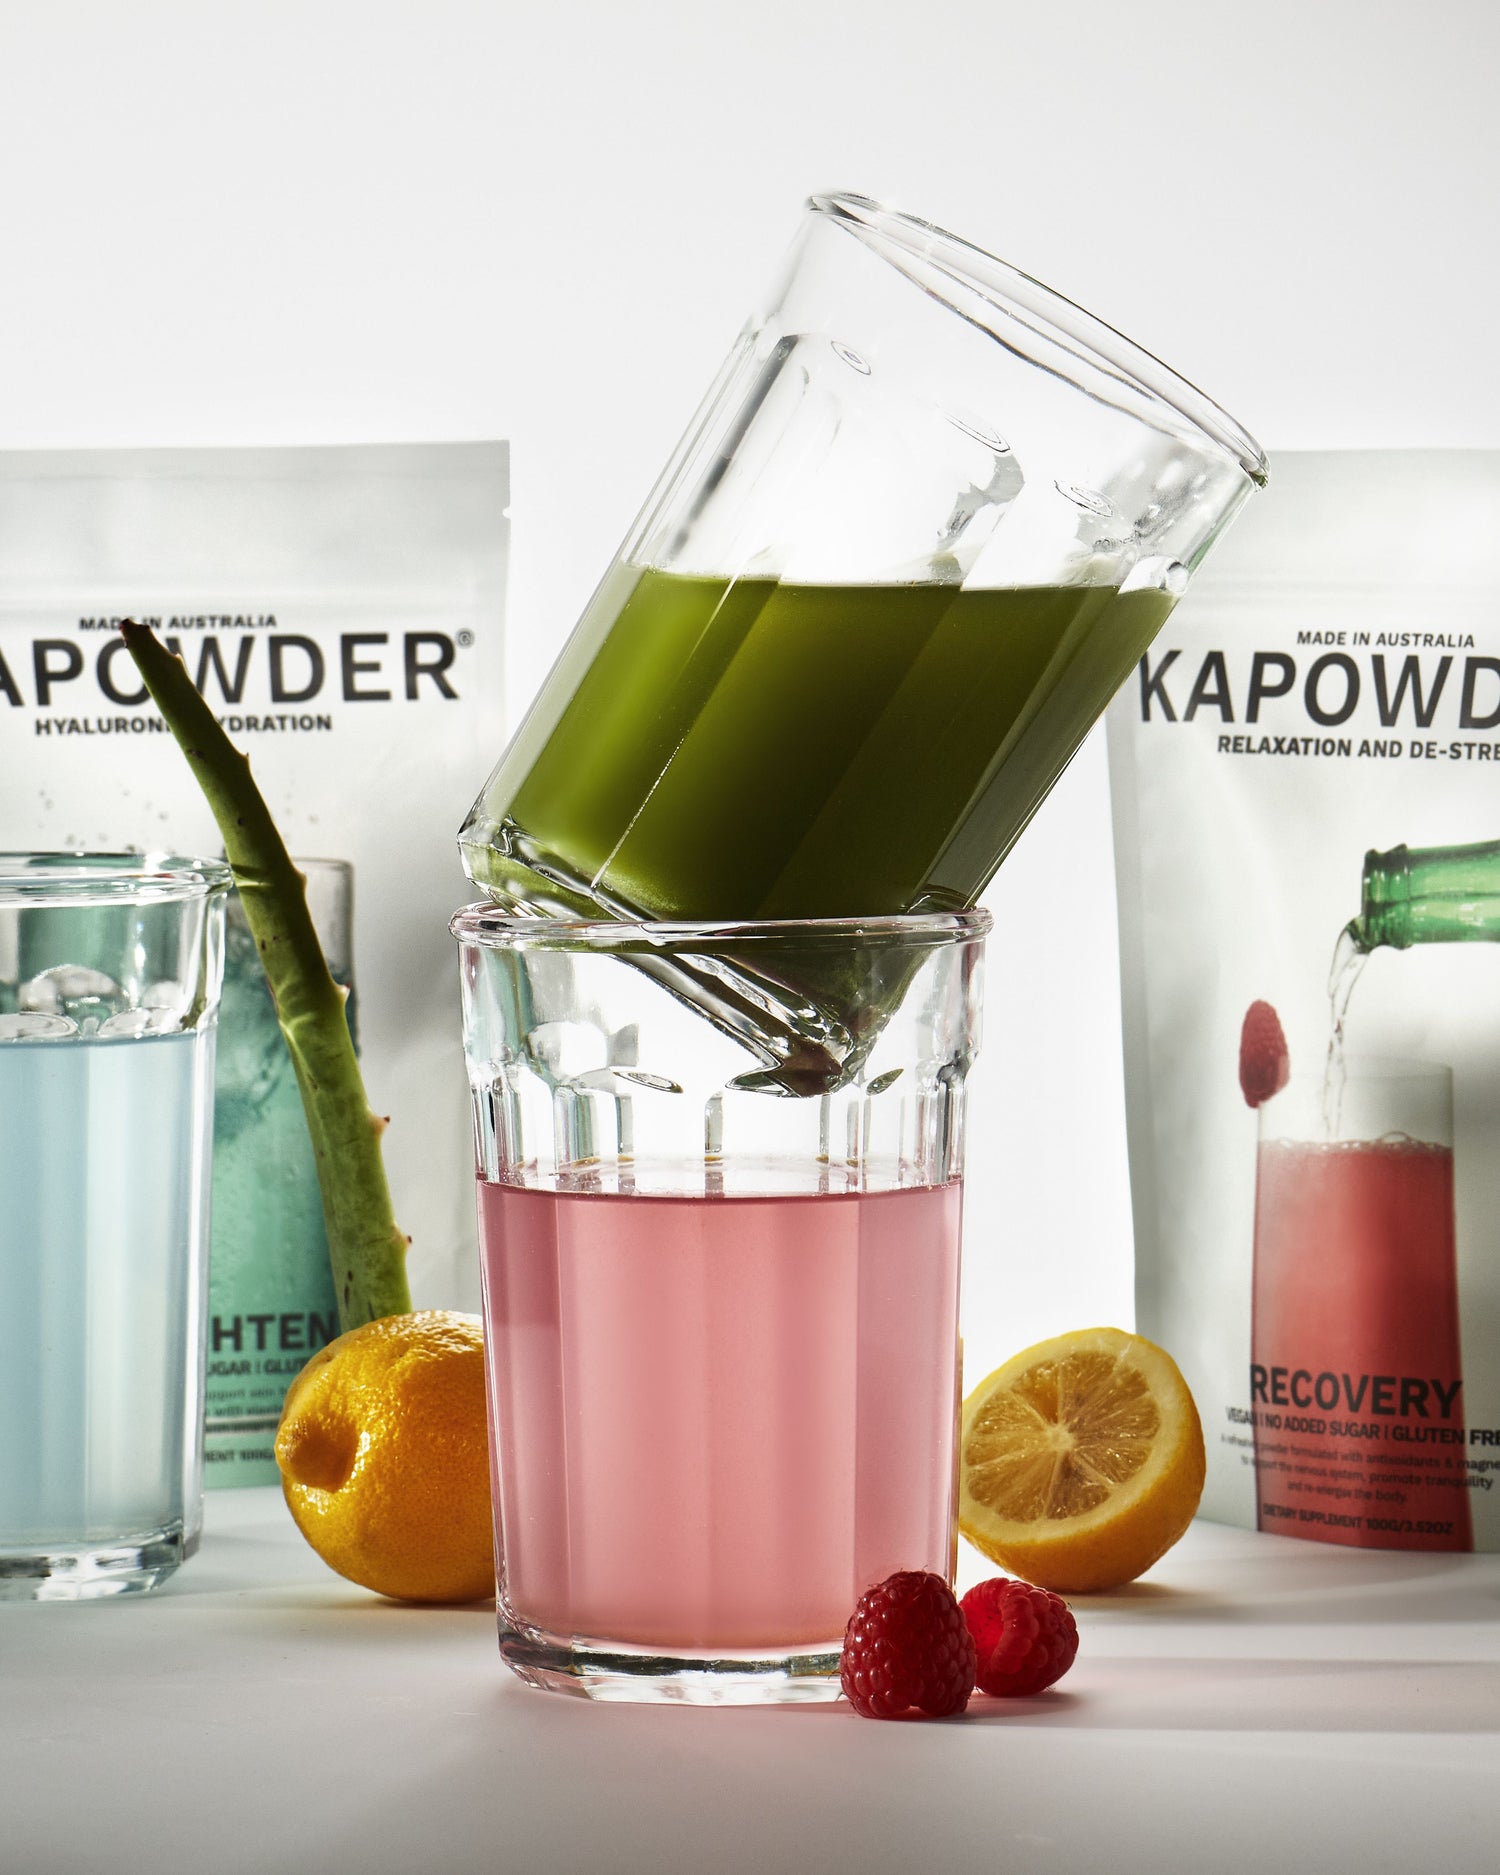 Collection of KAPOWDER products in use including enlighten for hyaluronic hydration, recovery for relaxation and magnesium and vitality greens powder in a glass of water.